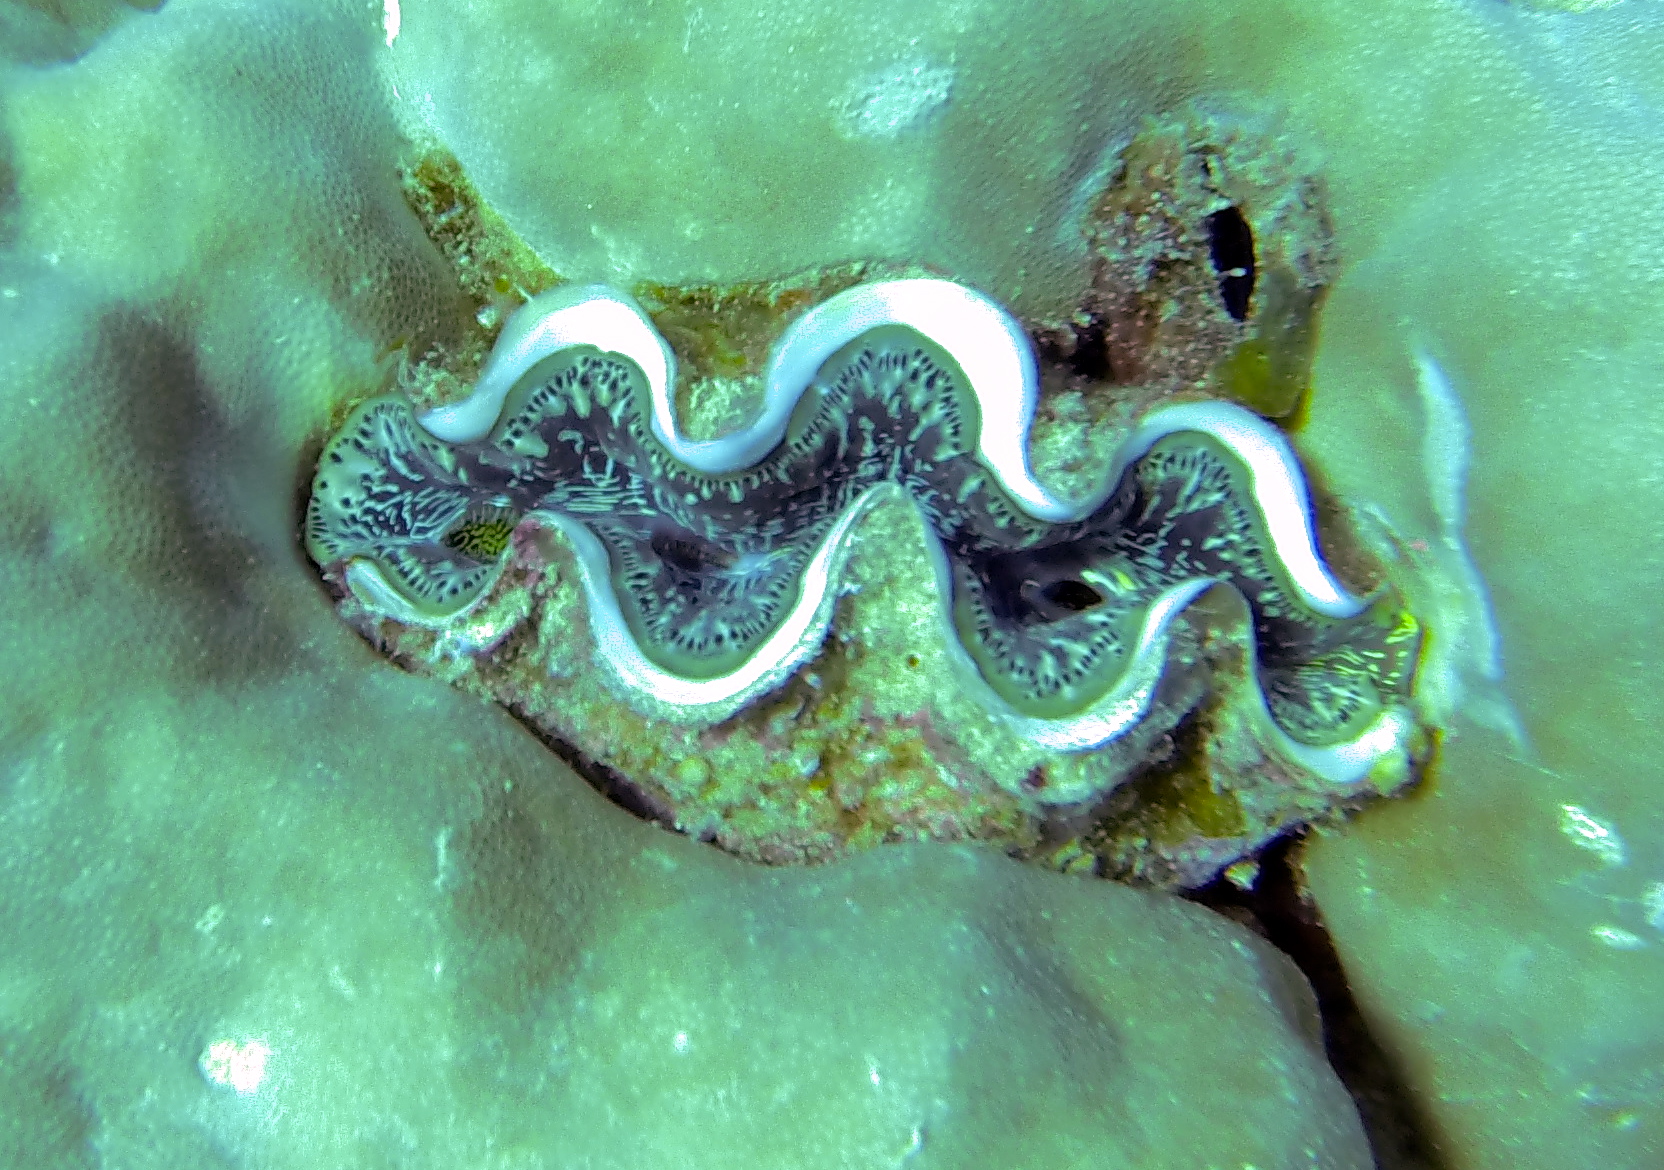 Giant Clam on the Great Barrier Reef